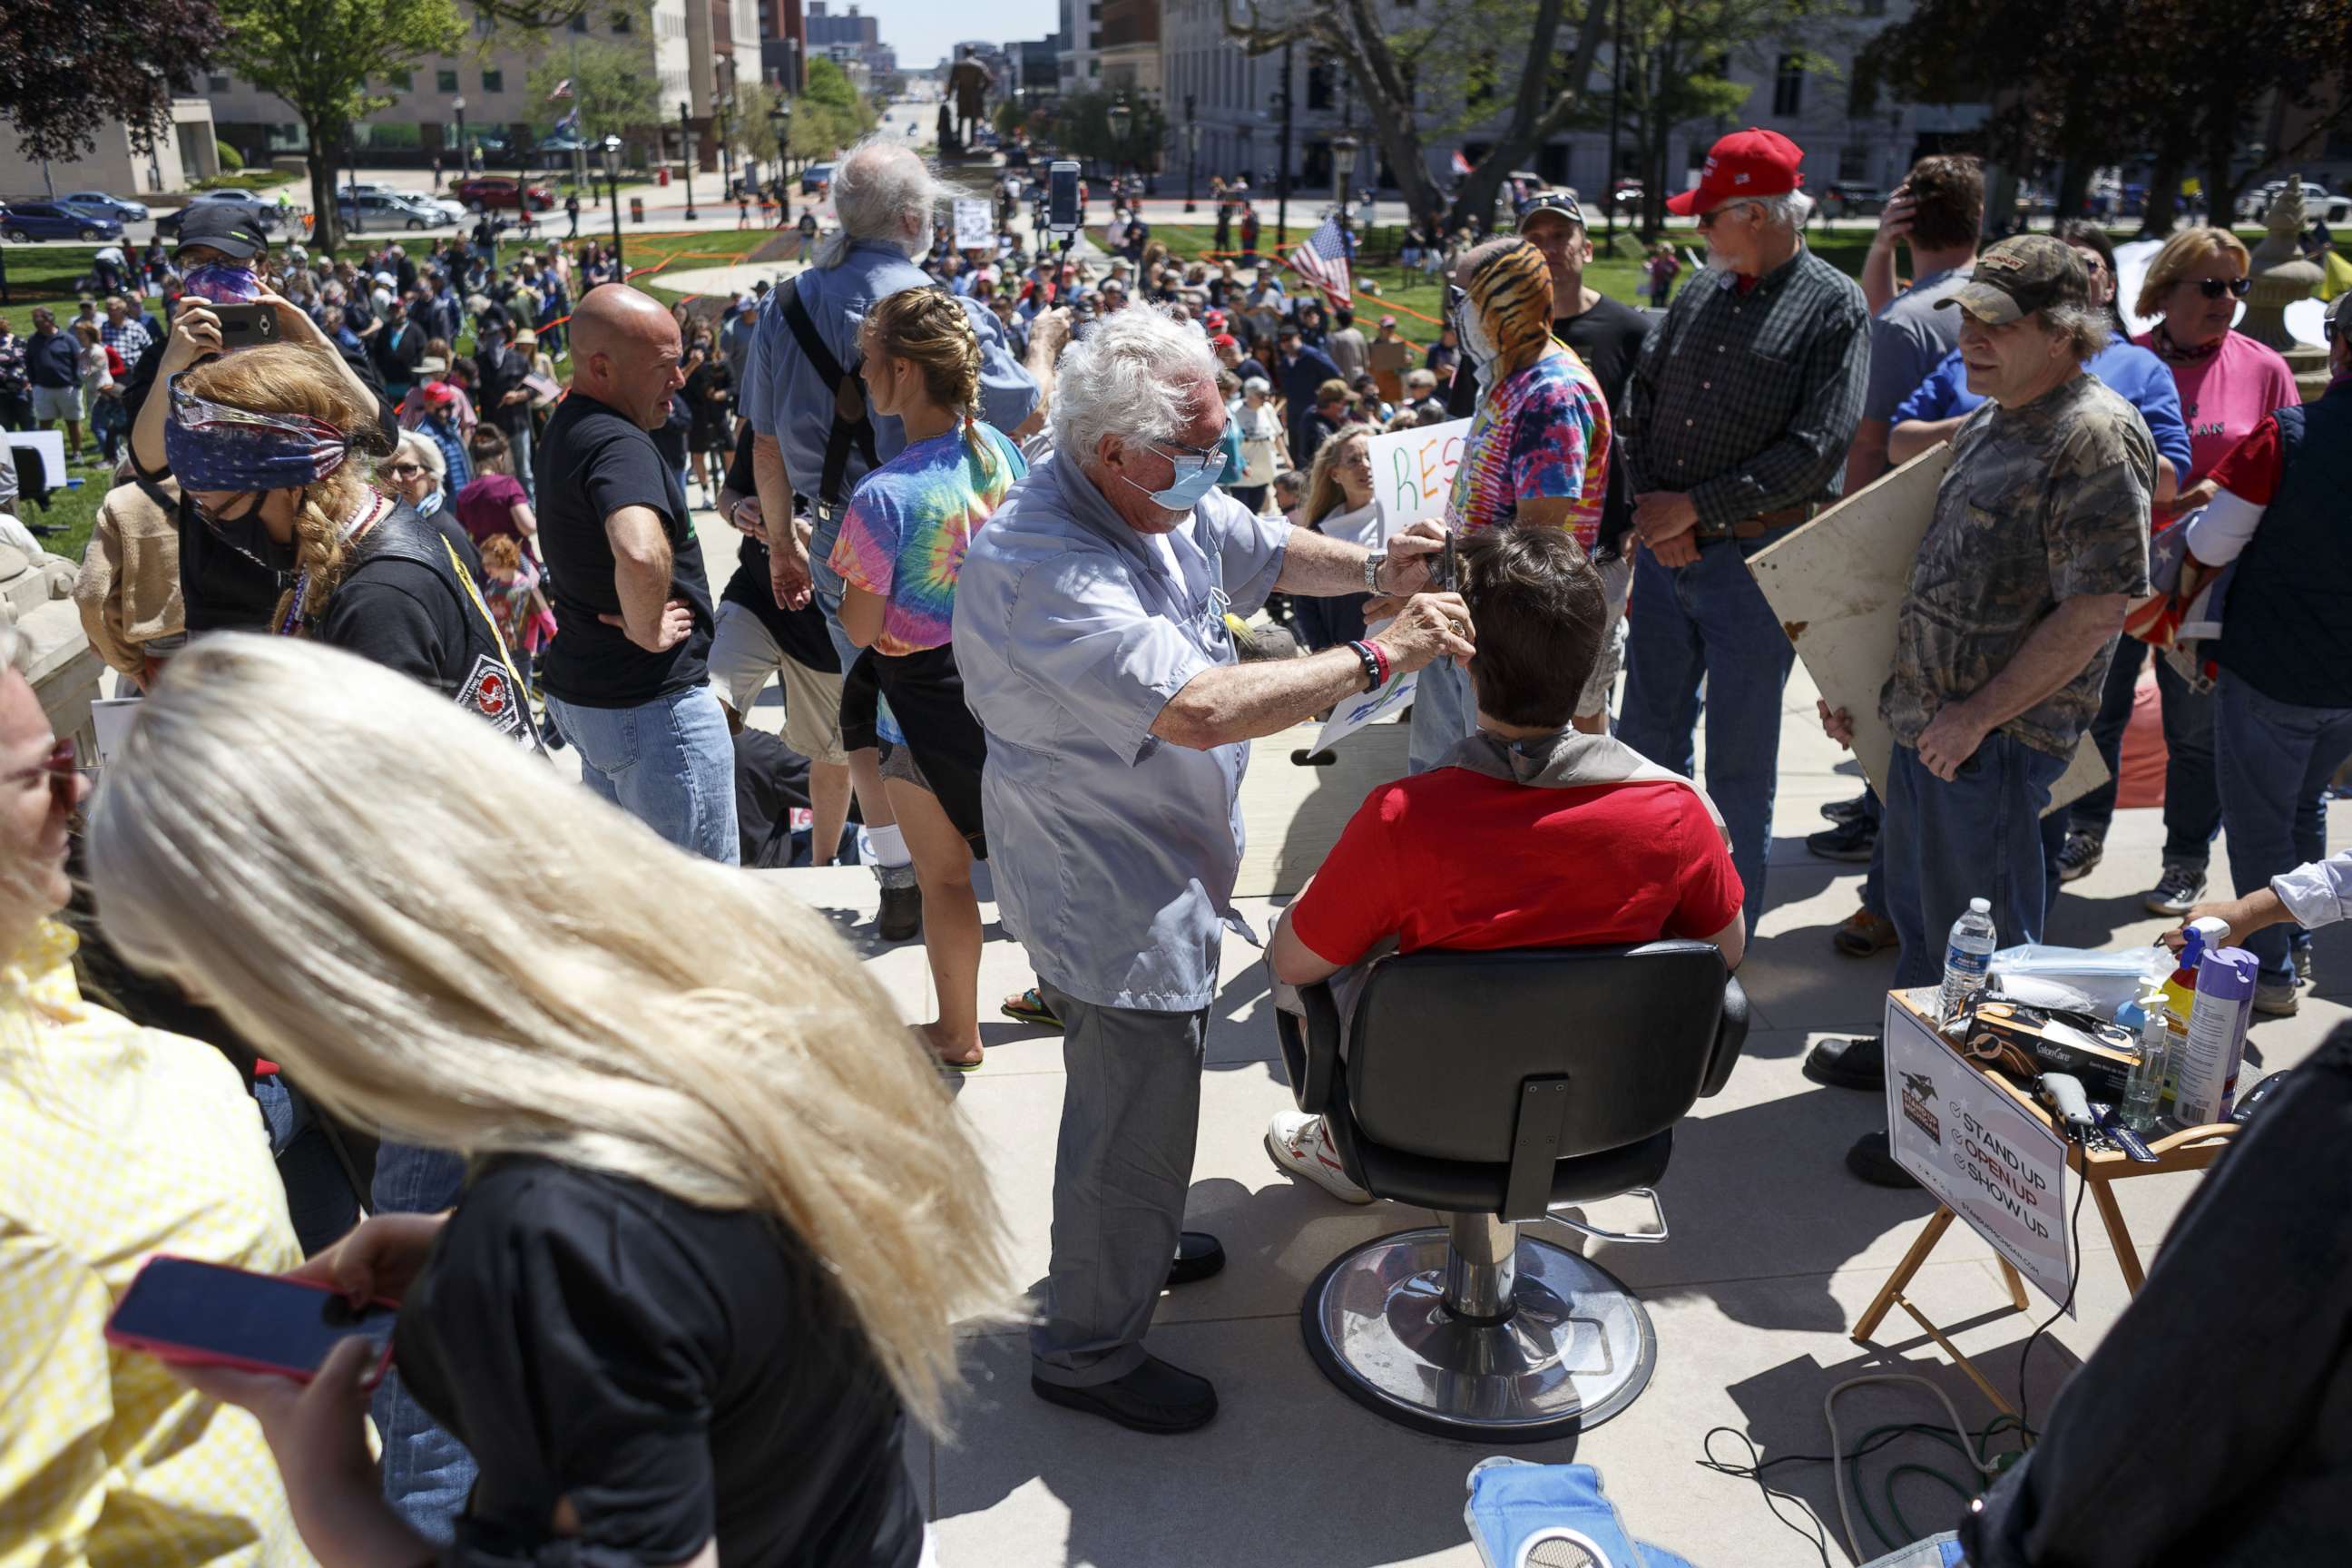 PHOTO: Owosso barber, Karl Manke, gives a free haircut to Parker Shonts, of Lake Orion, on the steps of the state Capitol during Operation Haircut on May 20, 2020 in Lansing, Michigan.